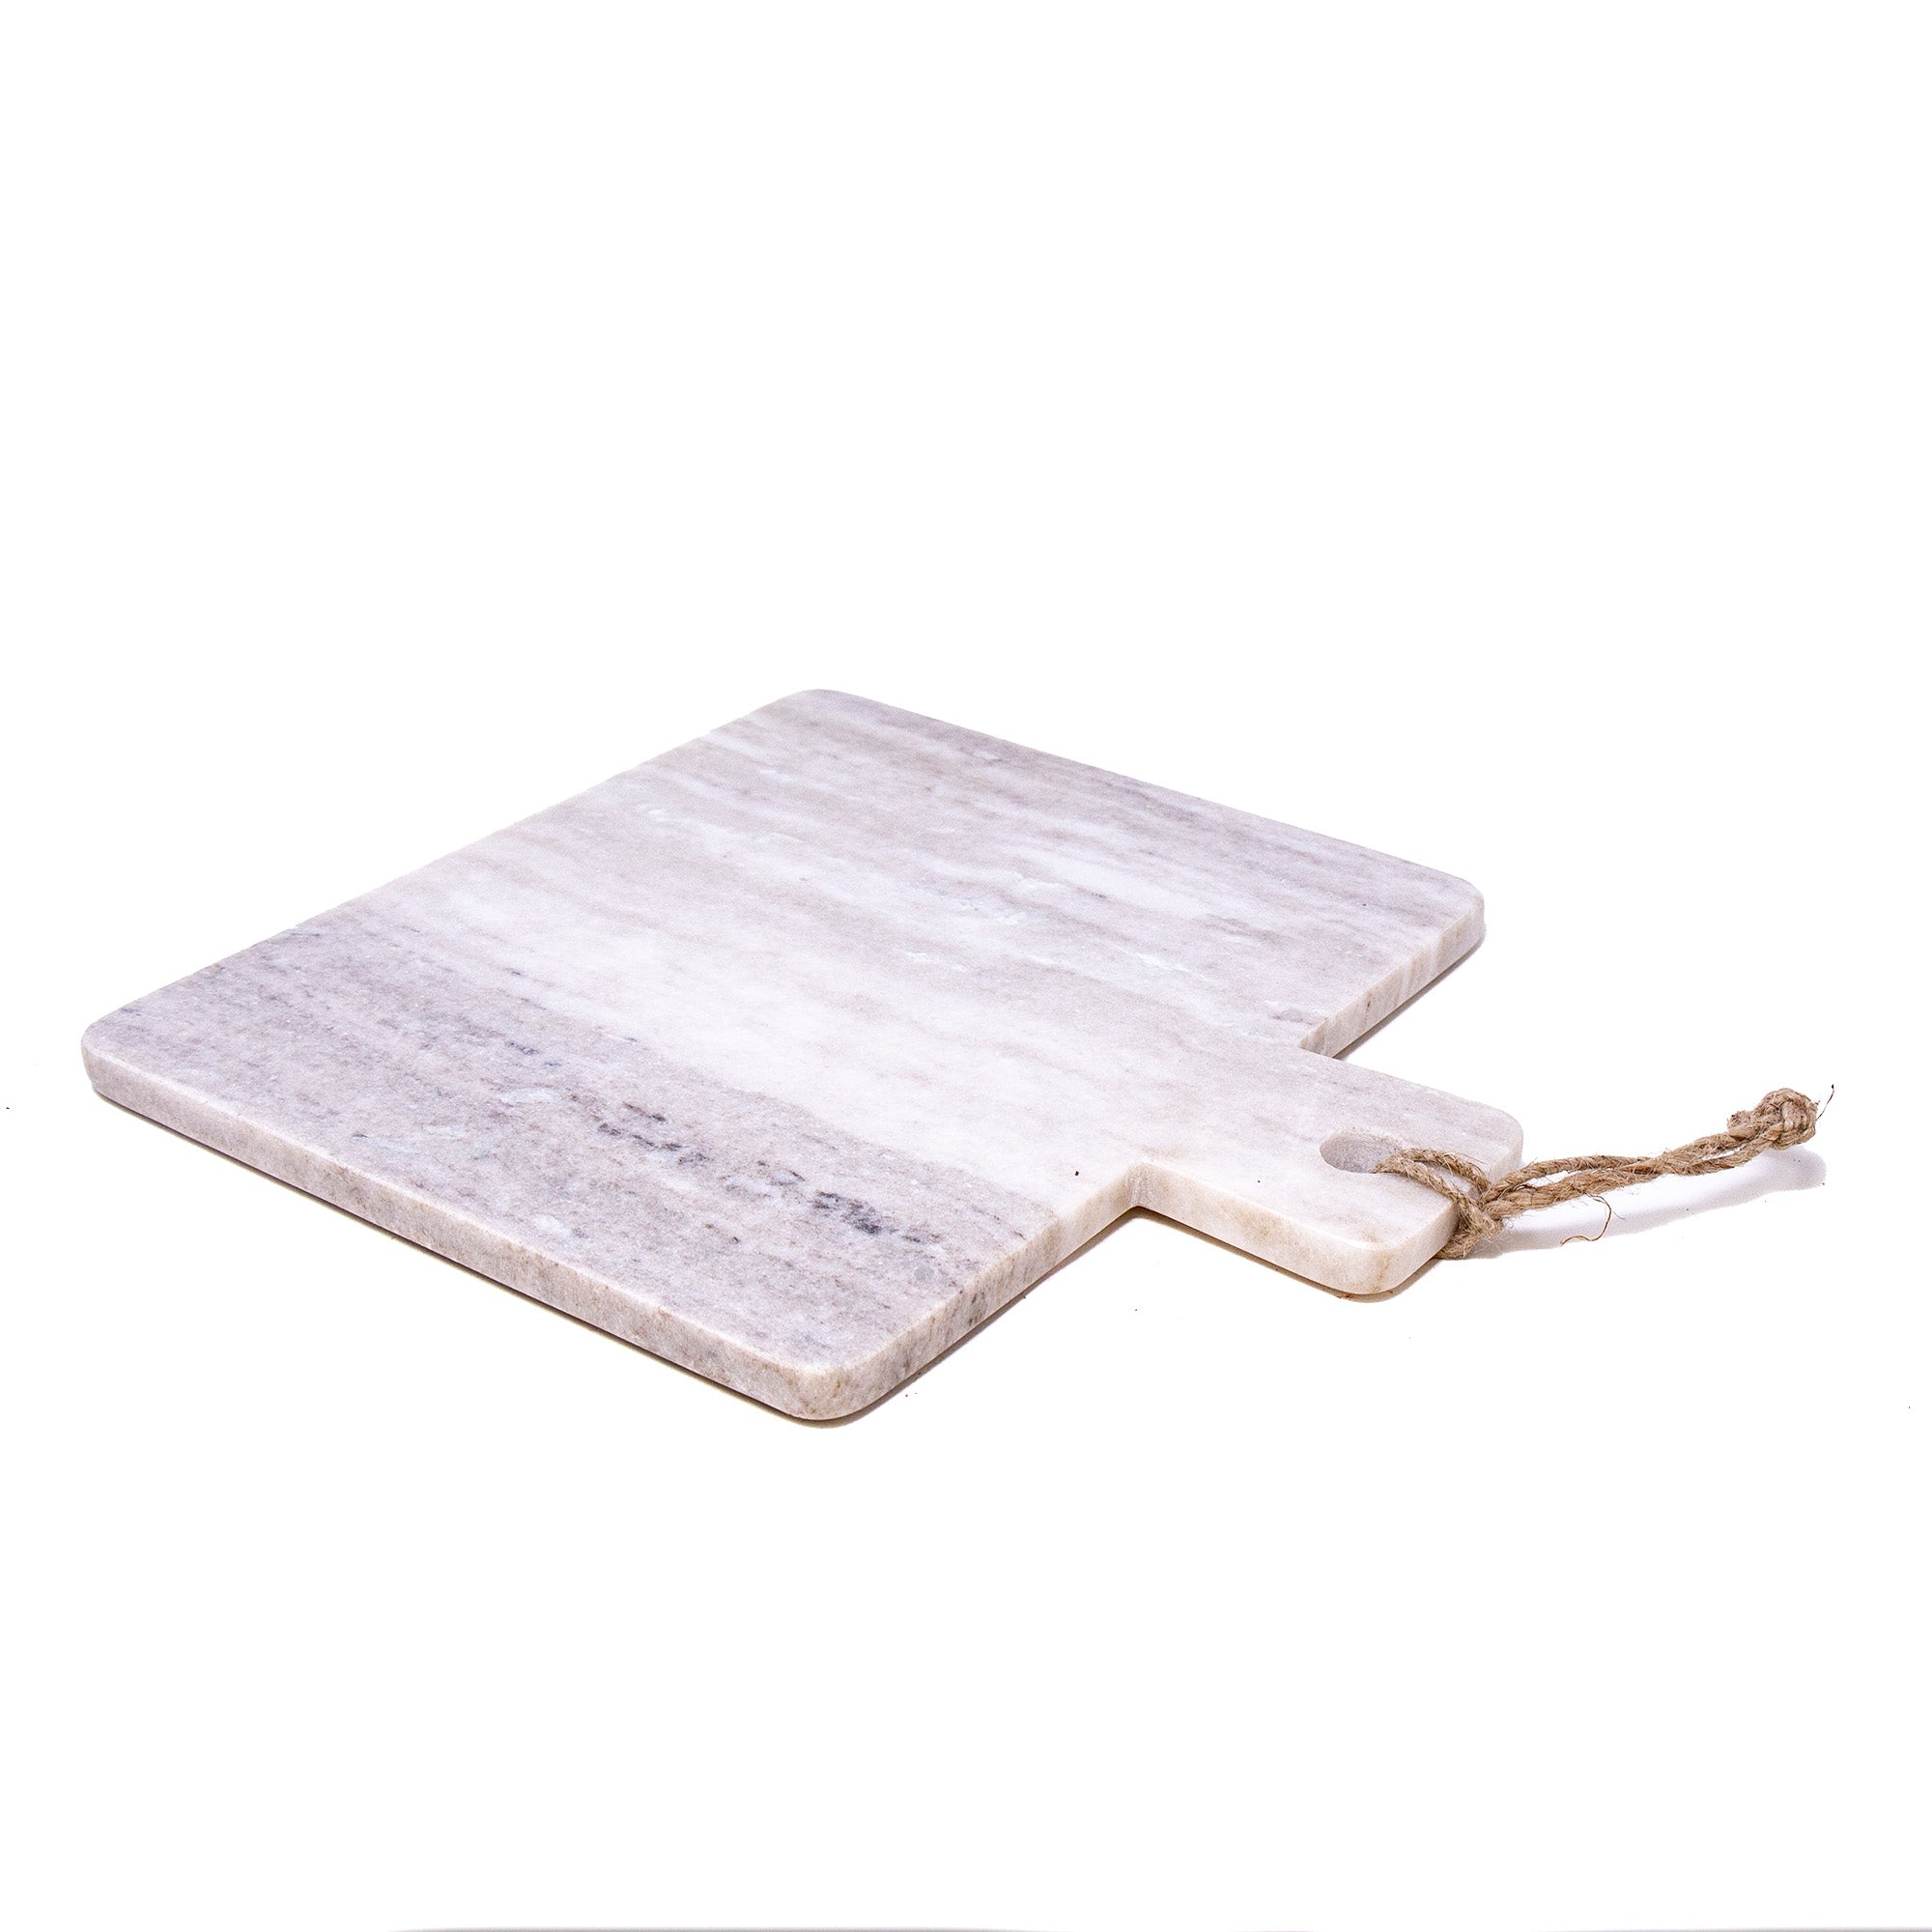 Handmade Marble Cheese or Cutting Board with Handle